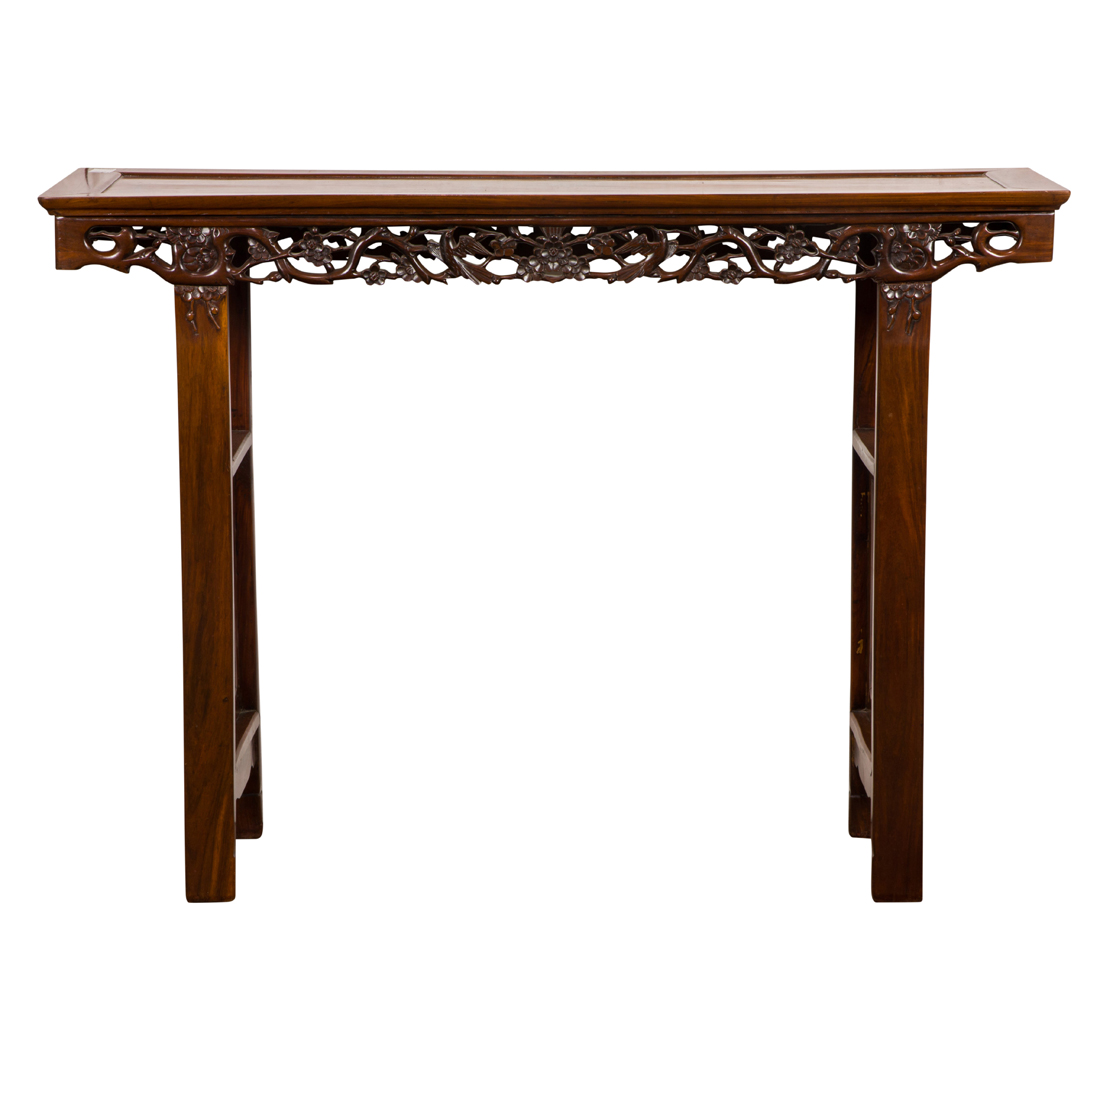 CHINESE HARDWOOD SIDE TABLE Chinese